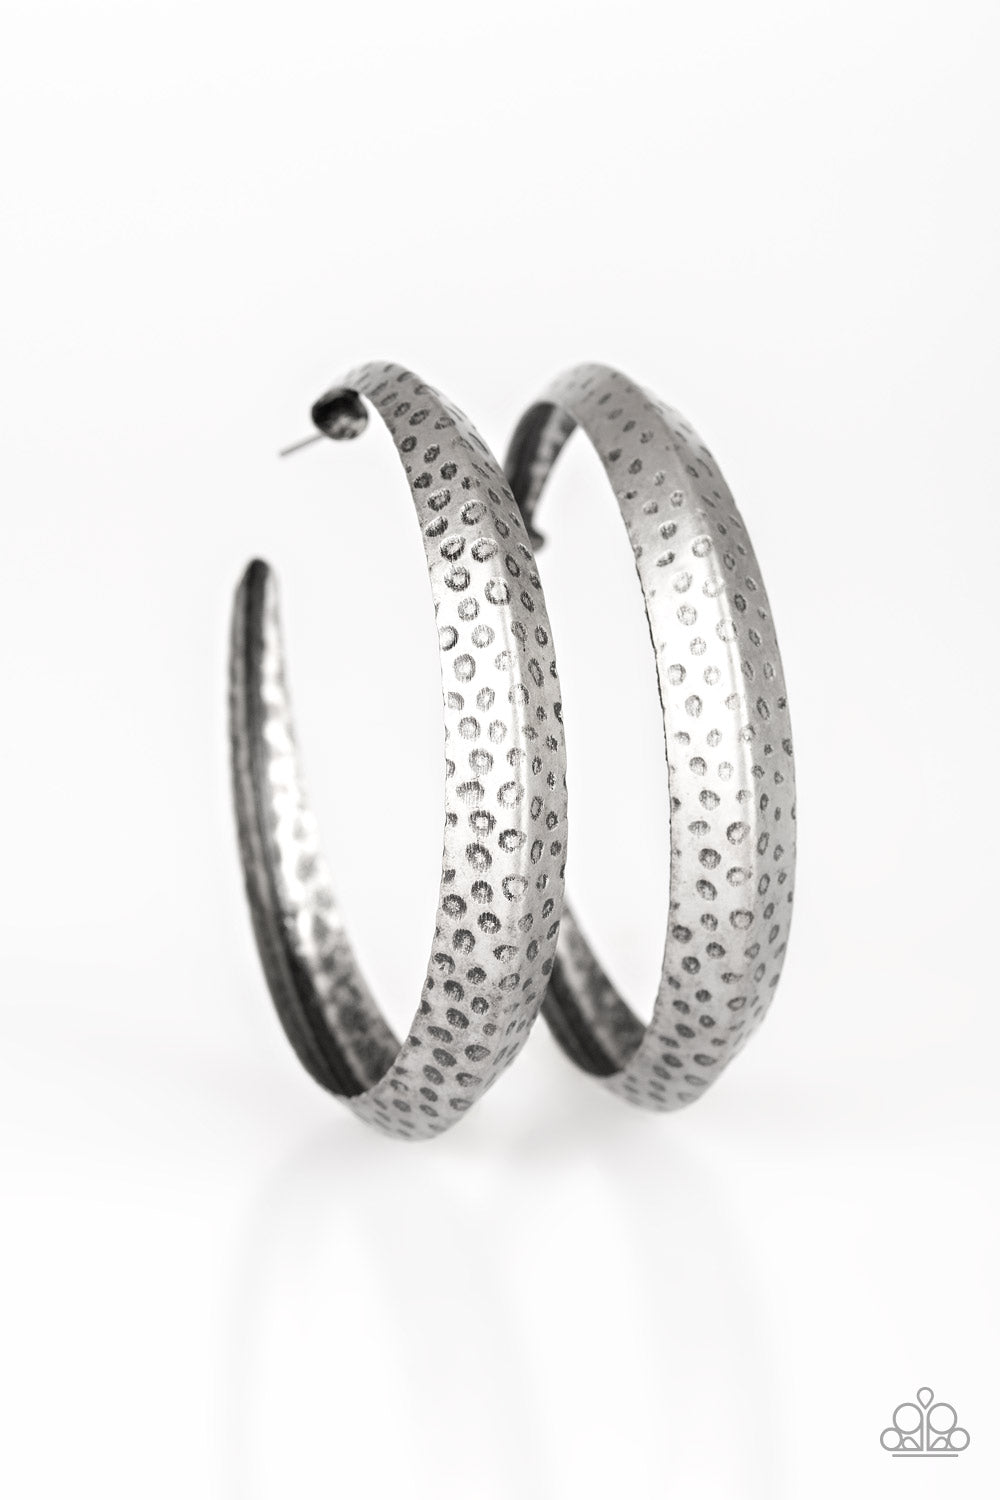 JUNGLE TO JUNGLE - SILVER ANIMAL TEXTURED LARGE HOOP EARRINGS